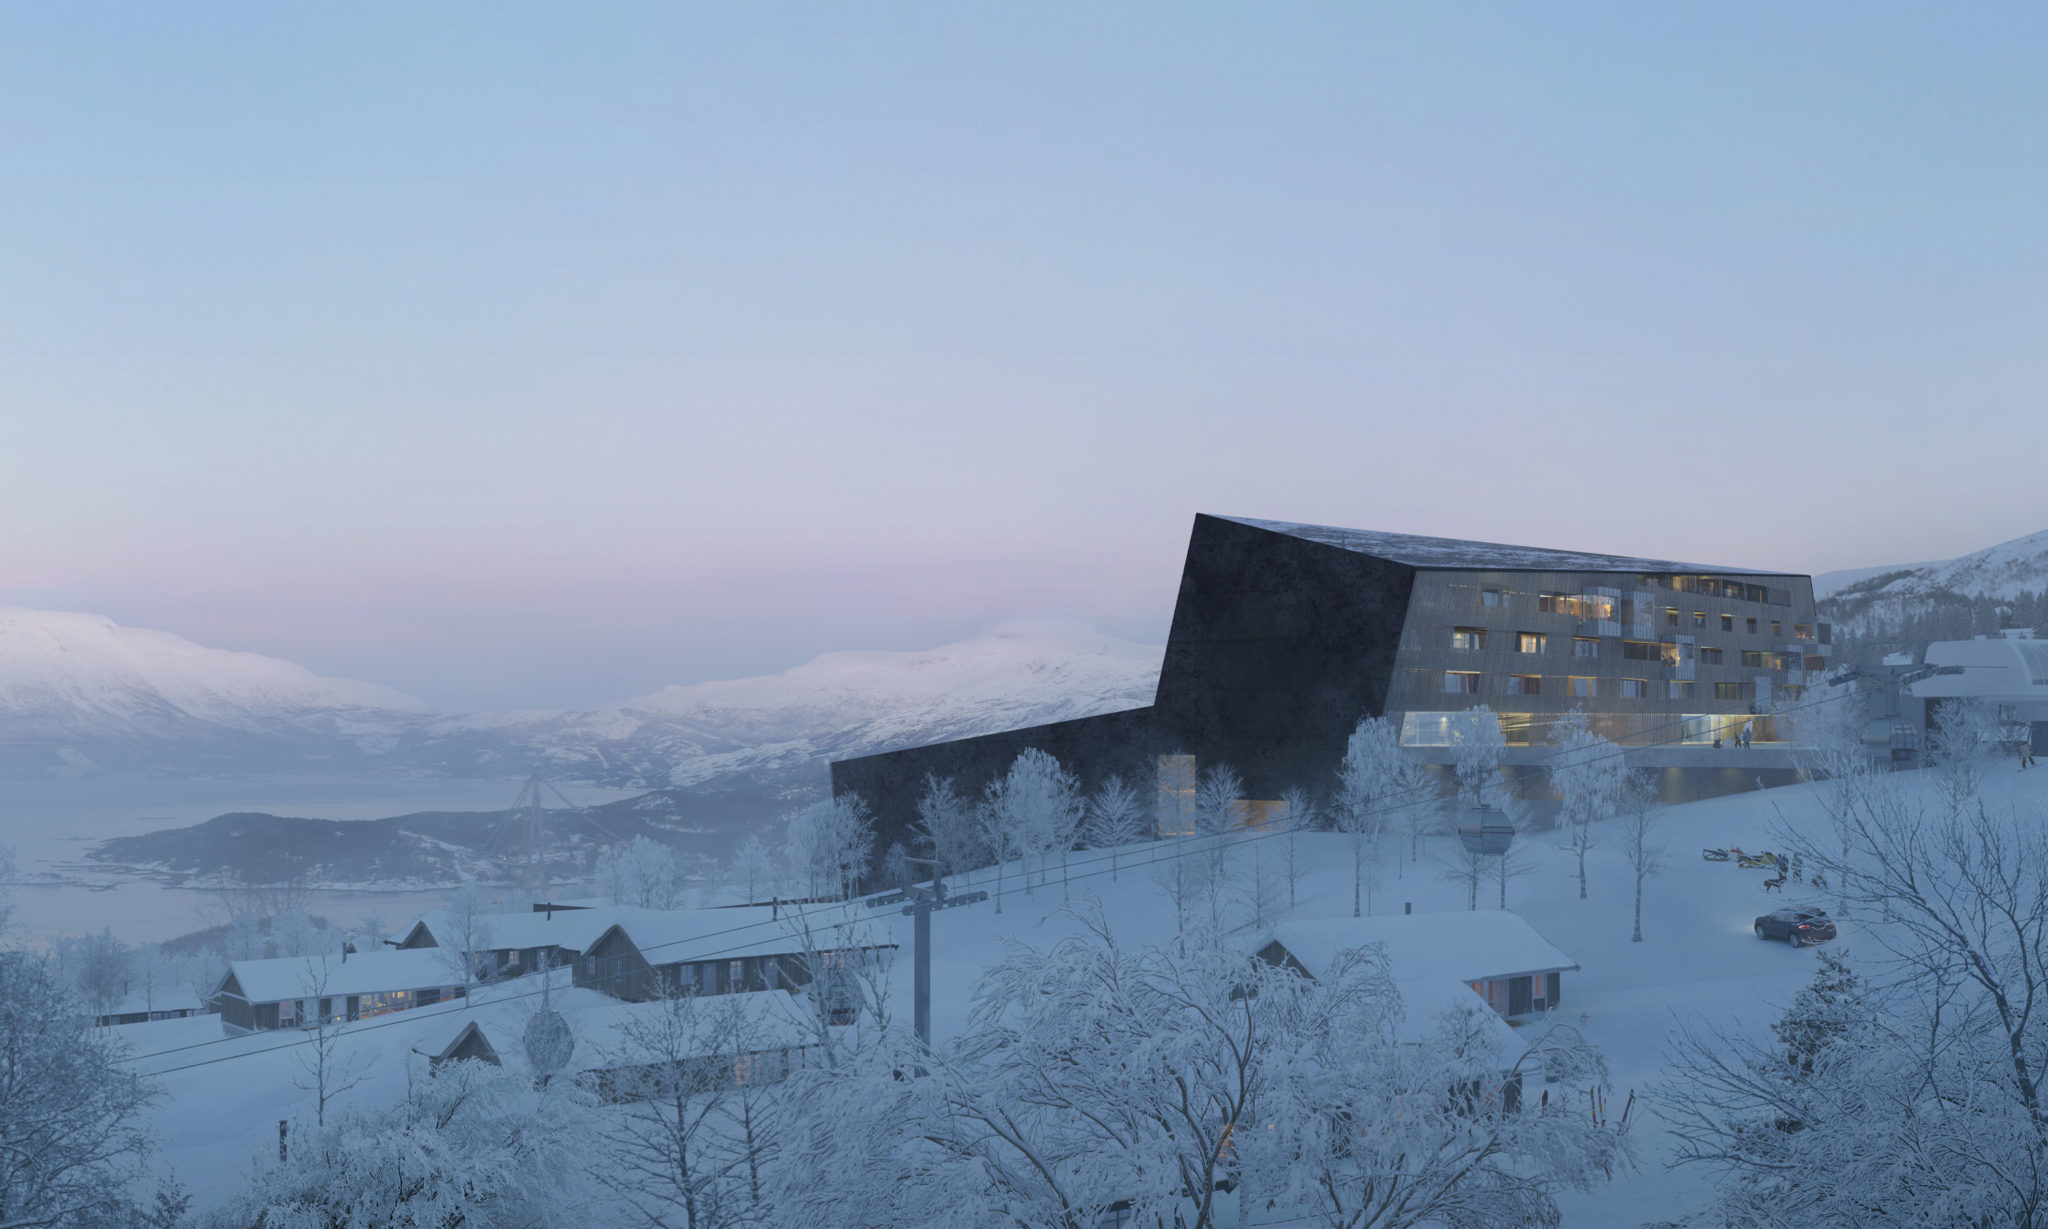 Modern apartment block on the mountainside with a view overlooking the valley and the mountains.